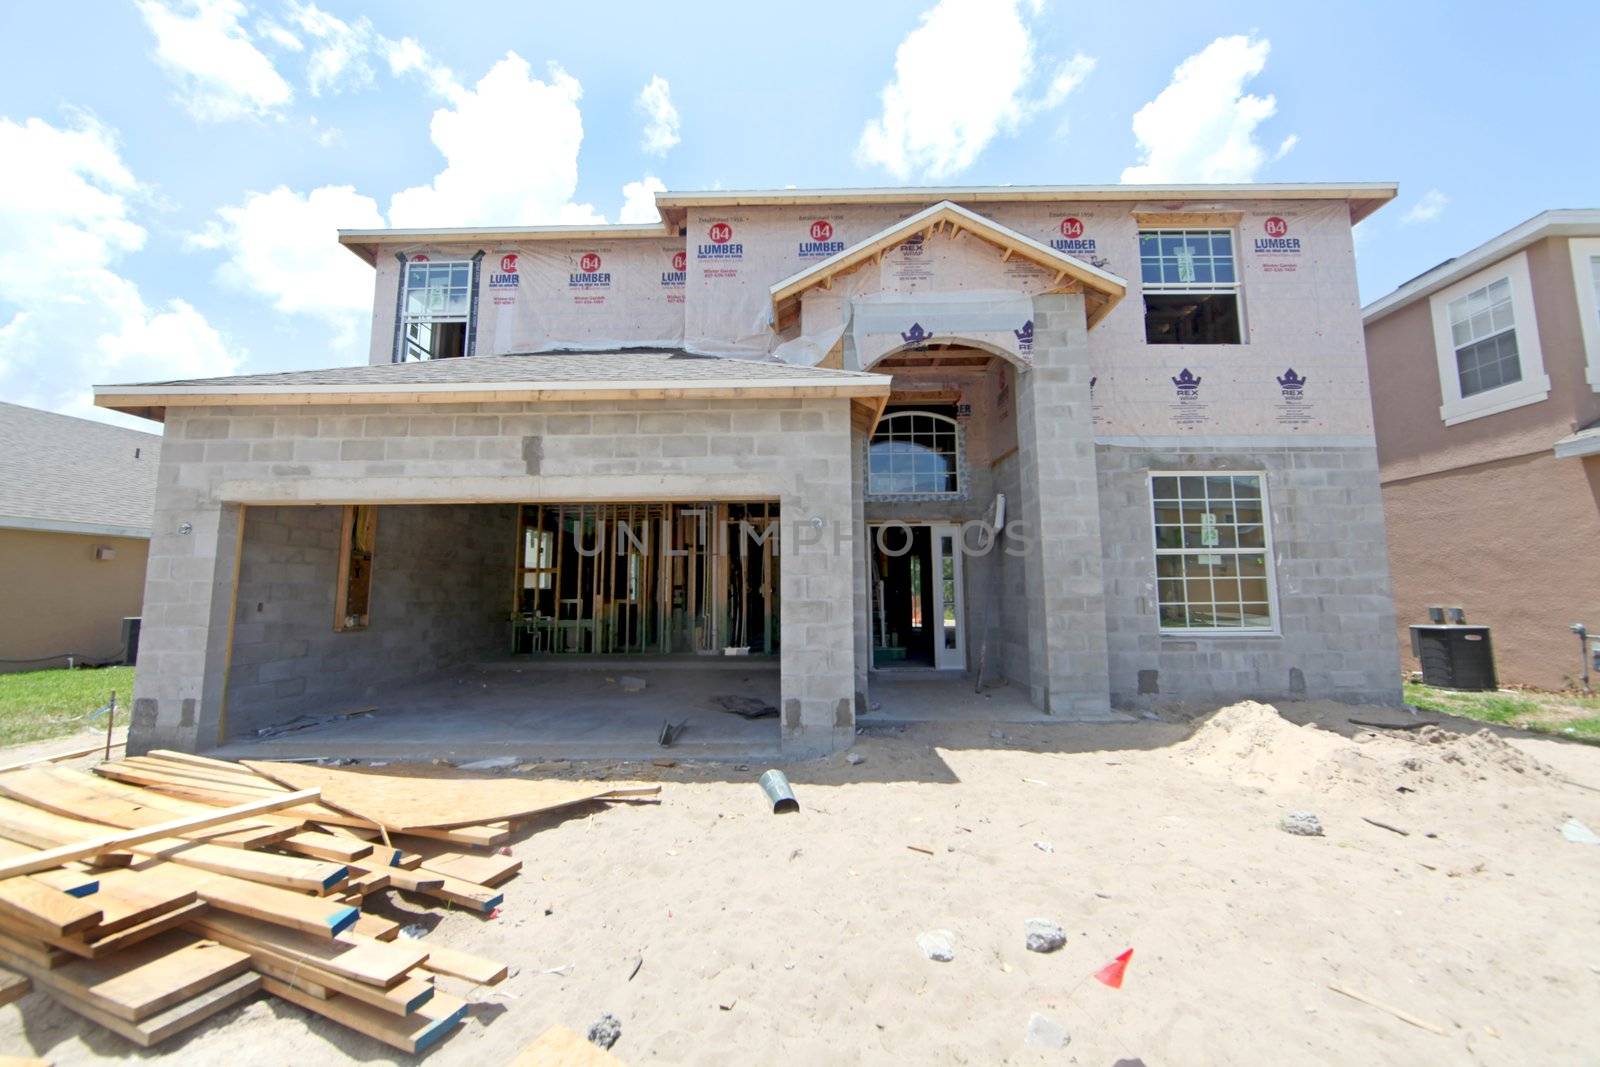 A large house under construction in Florida